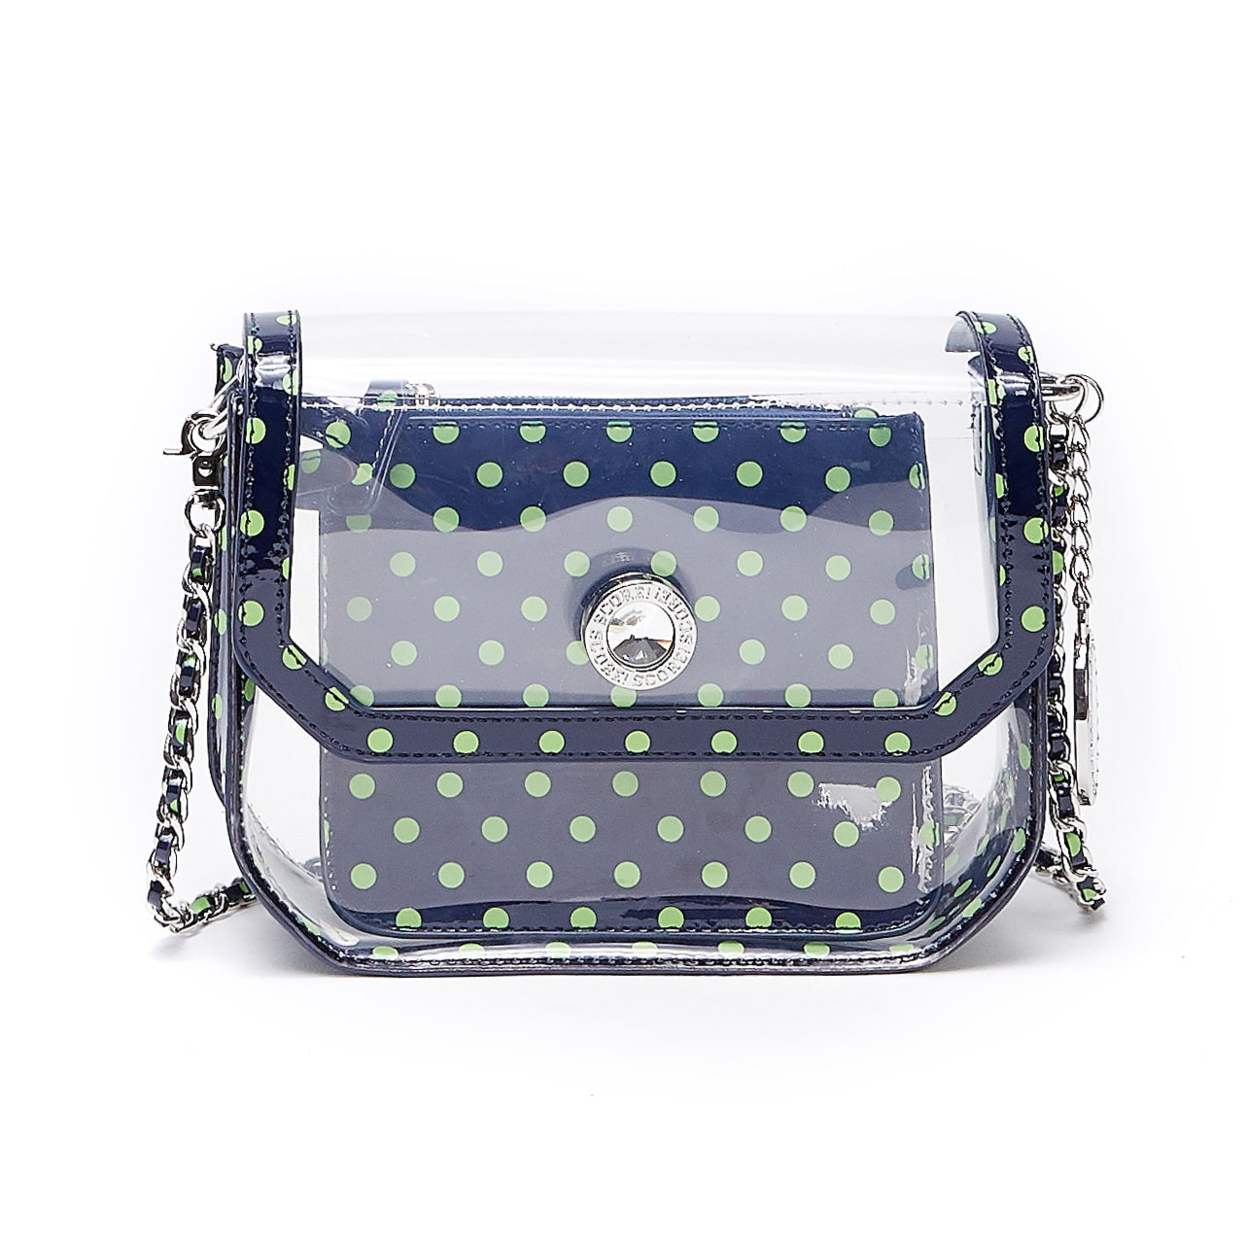 SCORE! The Official Game Day Bag SCORE! Chrissy Small Designer Clear Crossbody Bag - Navy Blue and Lime Green